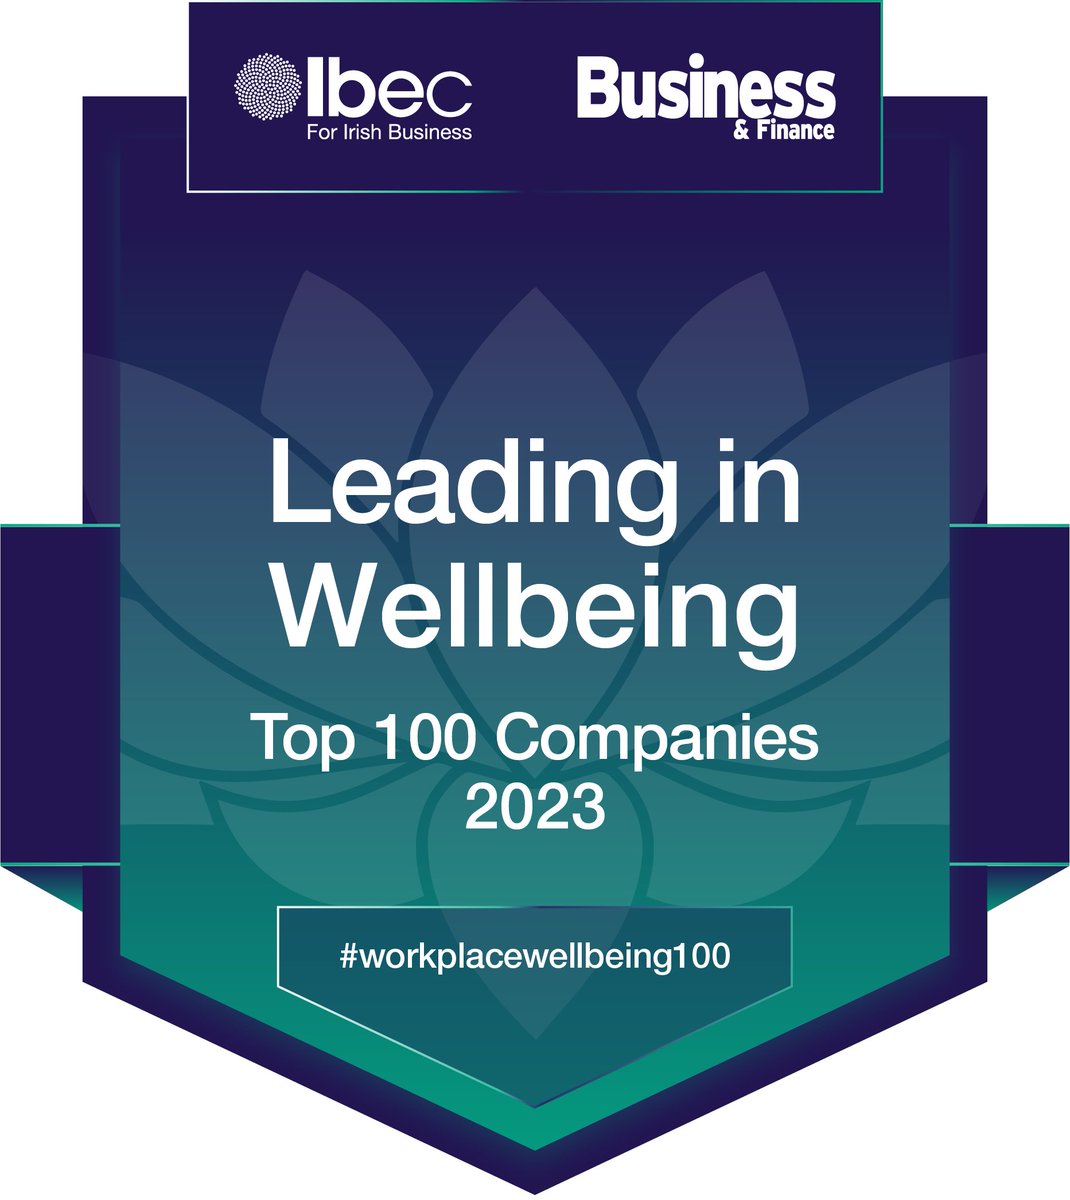 #GRETB is proud to be included in the Leading in Wellbeing Top 100 Companies 2023. The index, published by @ibec_irl in partnership with @BandF, acknowledges companies in Ireland who are leading the way for employee wellbeing. See: ibec.ie/employer-hub/c… 

#workplacewellbeing100